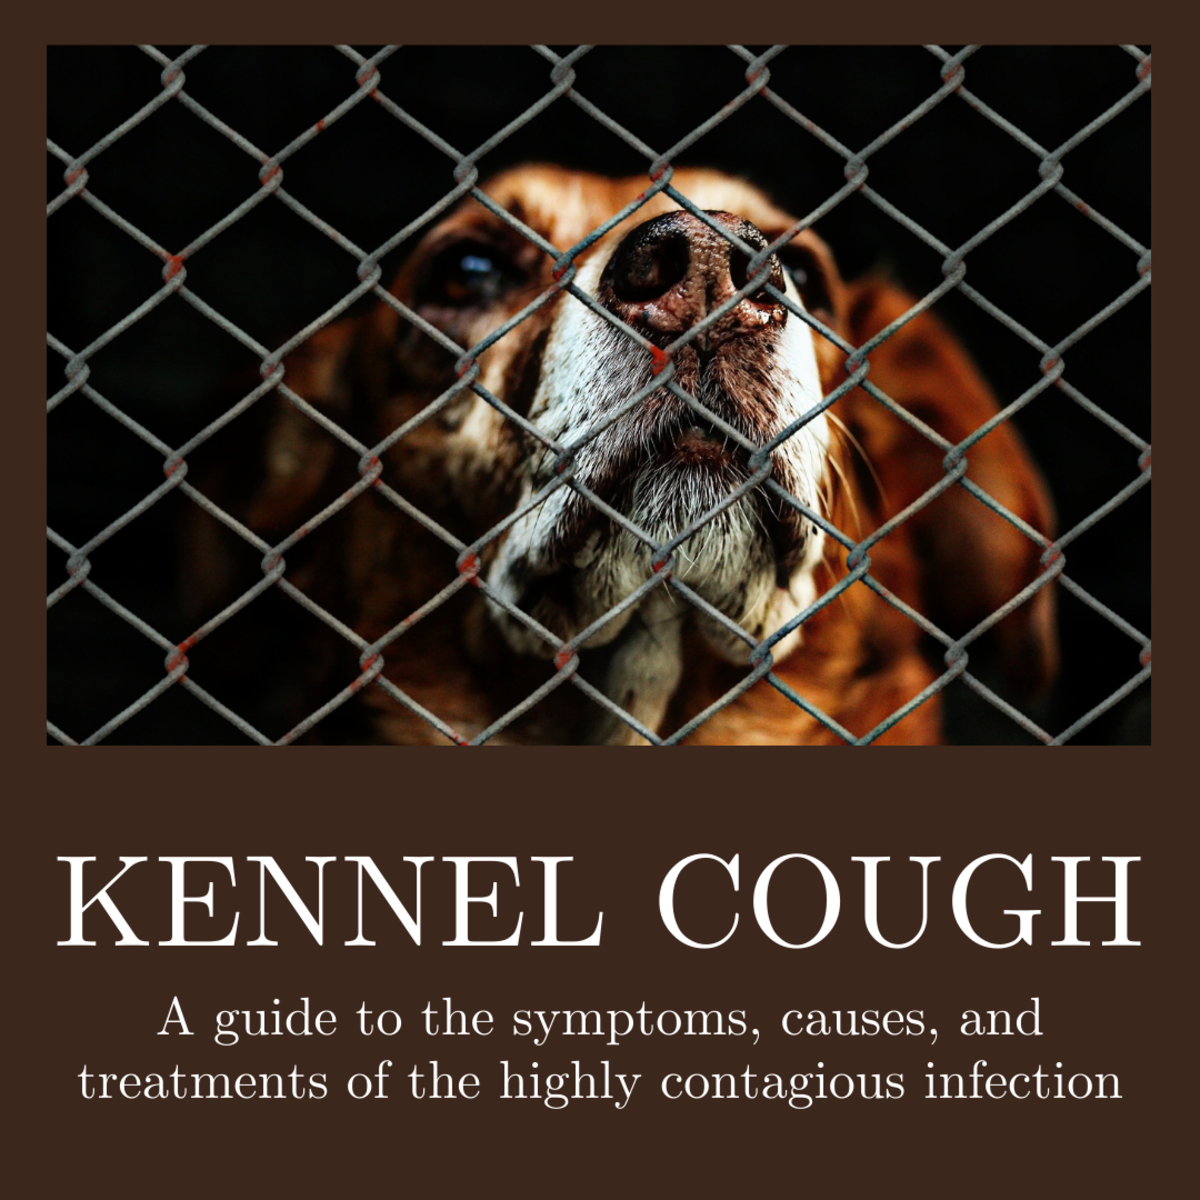 This article will break down the symptoms, causes, and treatments for the highly contagious respiratory infection known as kennel cough.